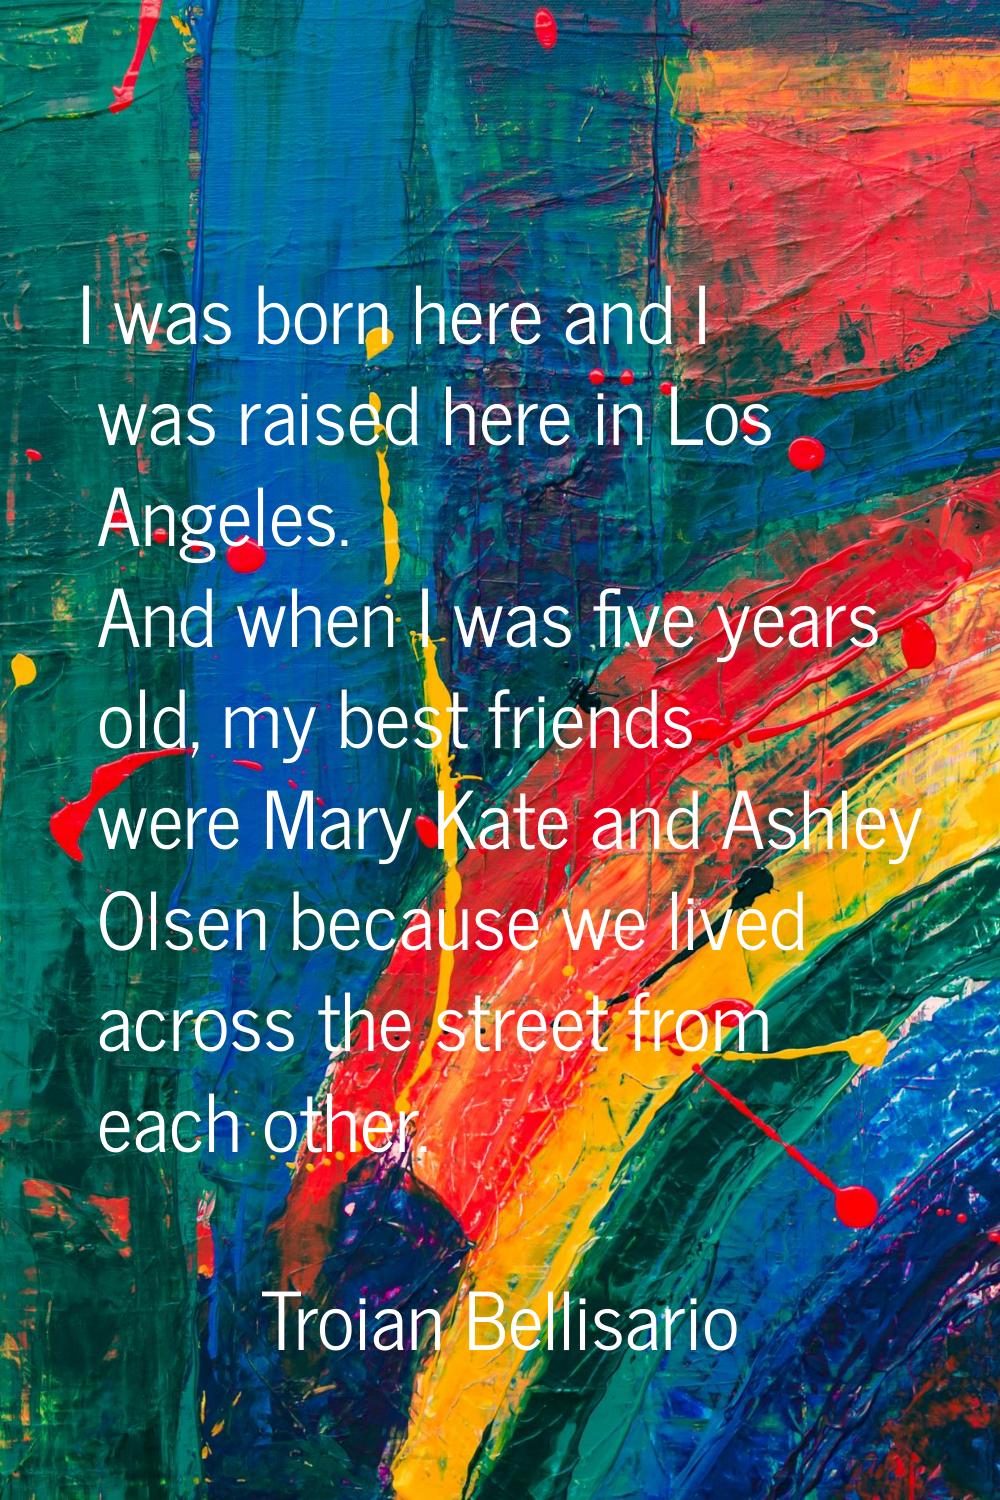 I was born here and I was raised here in Los Angeles. And when I was five years old, my best friend